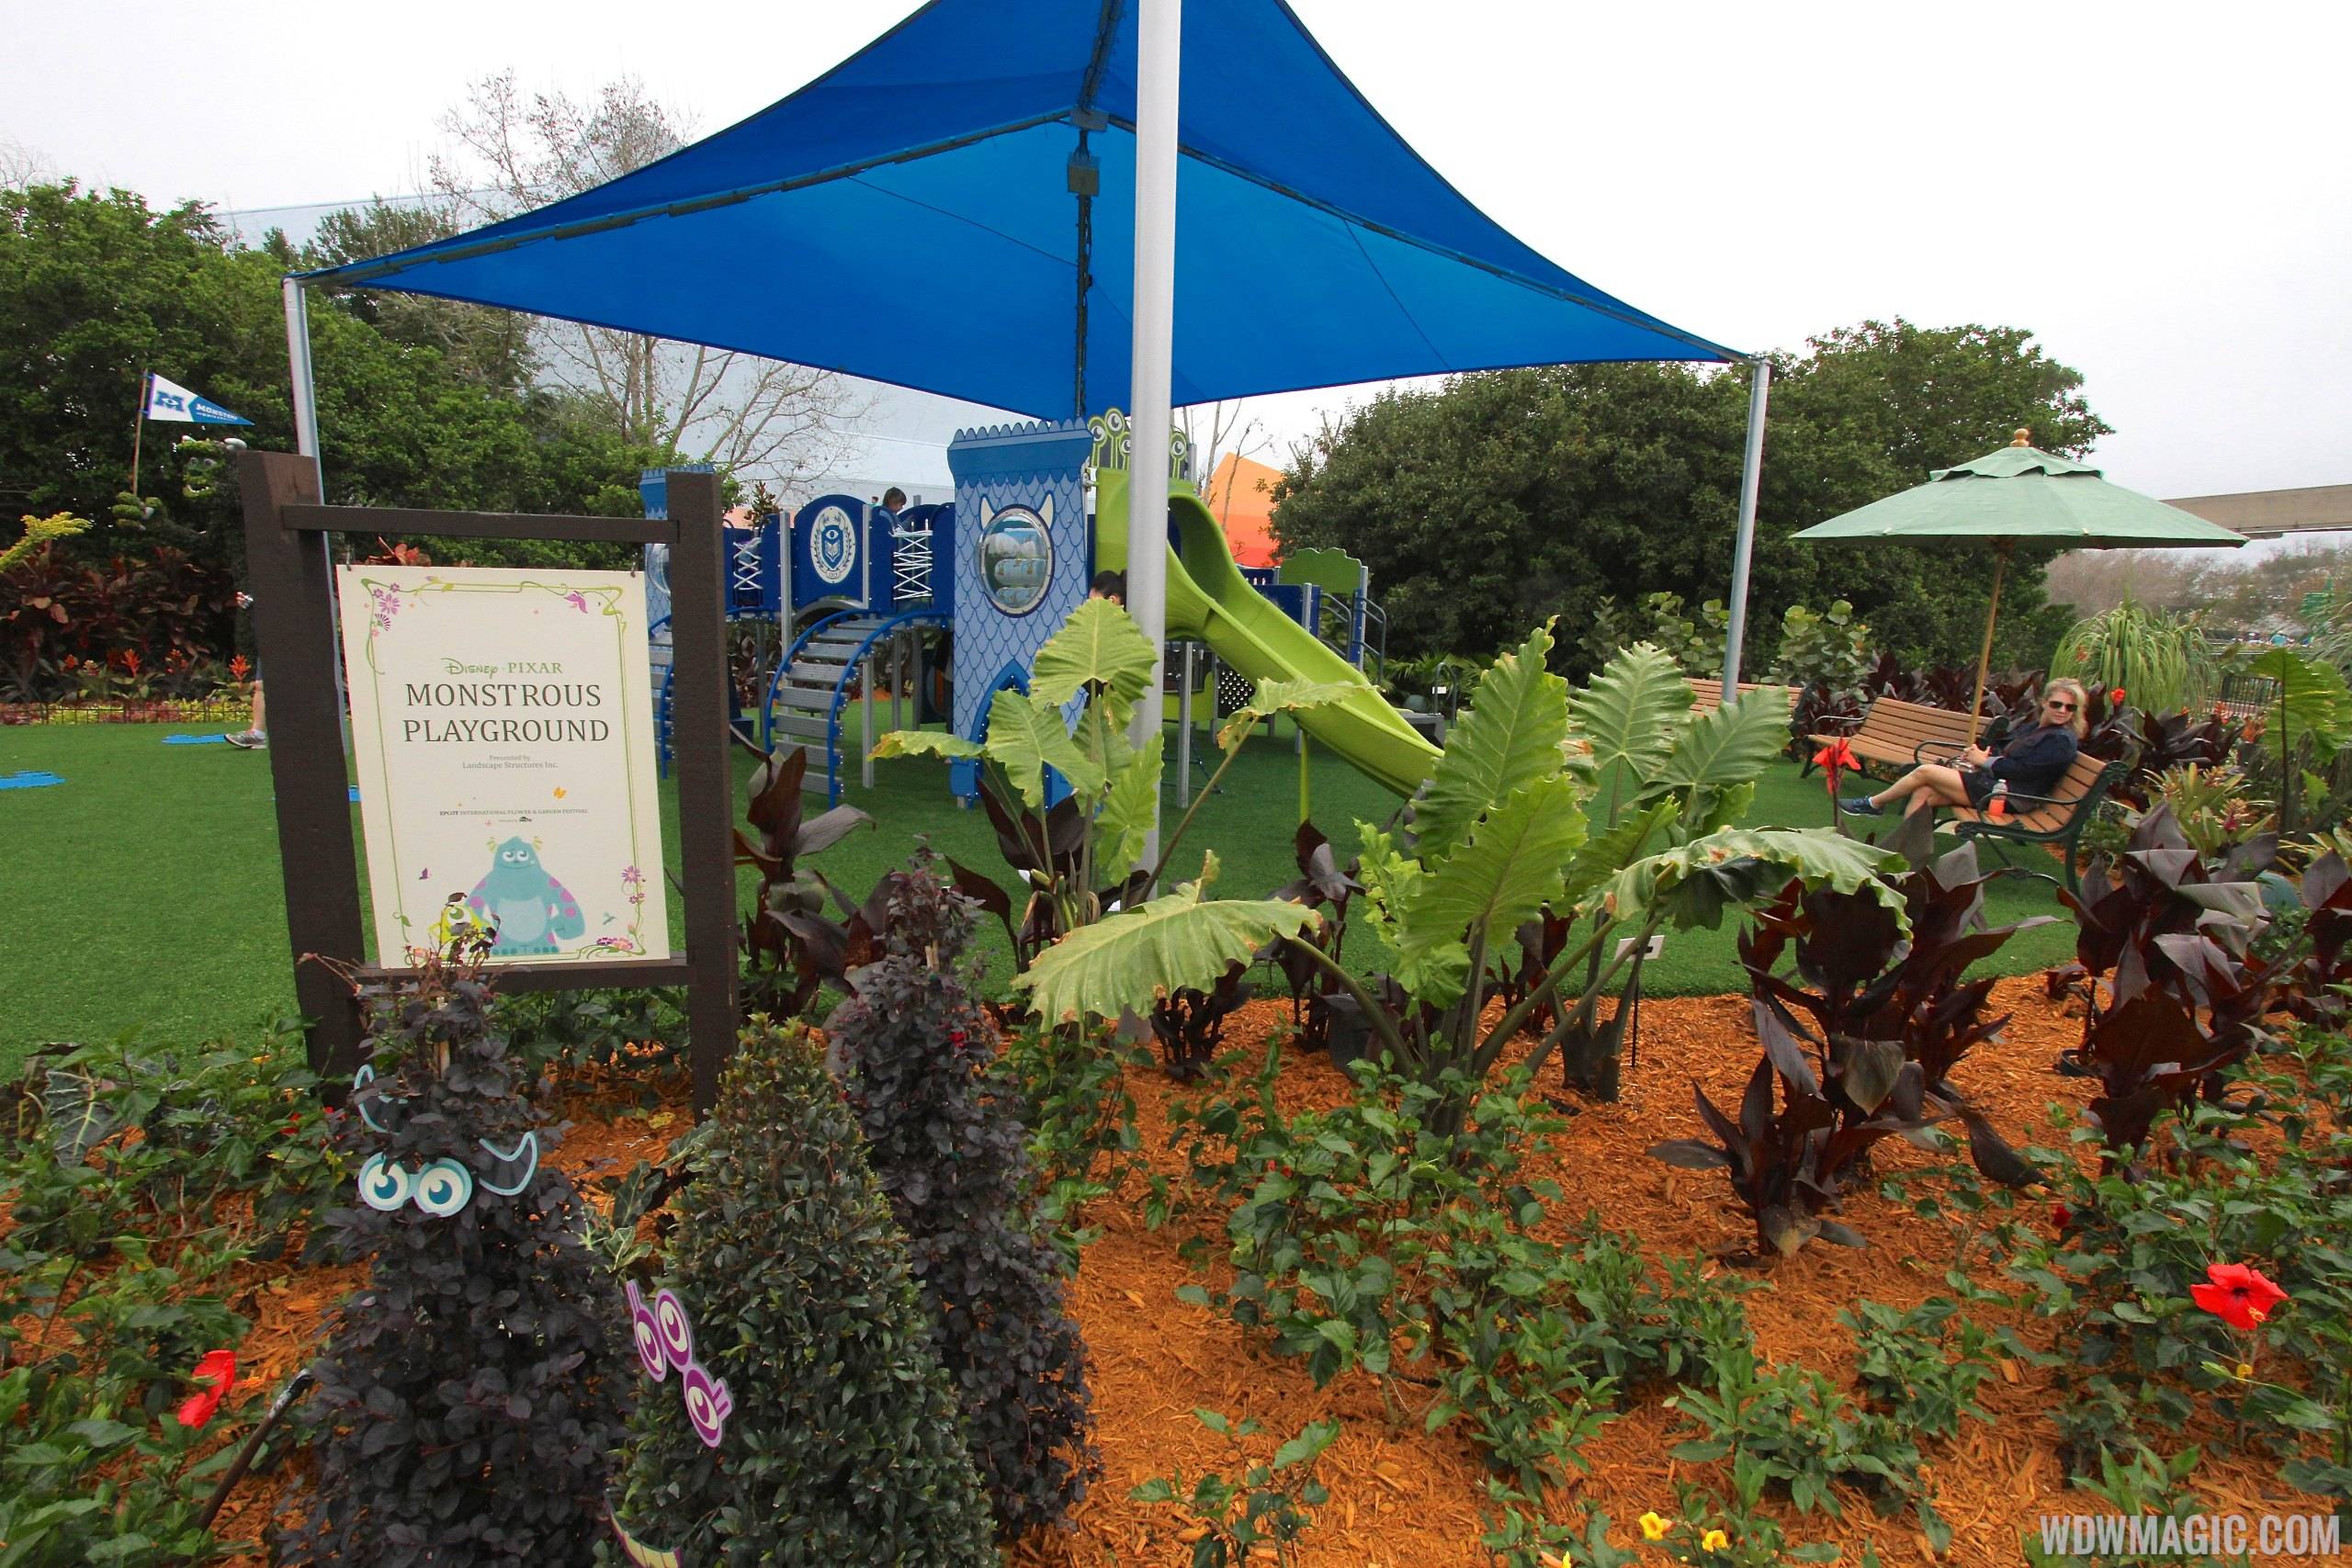 2014 Epcot Flower and Garden Festival - Monstrous Playground